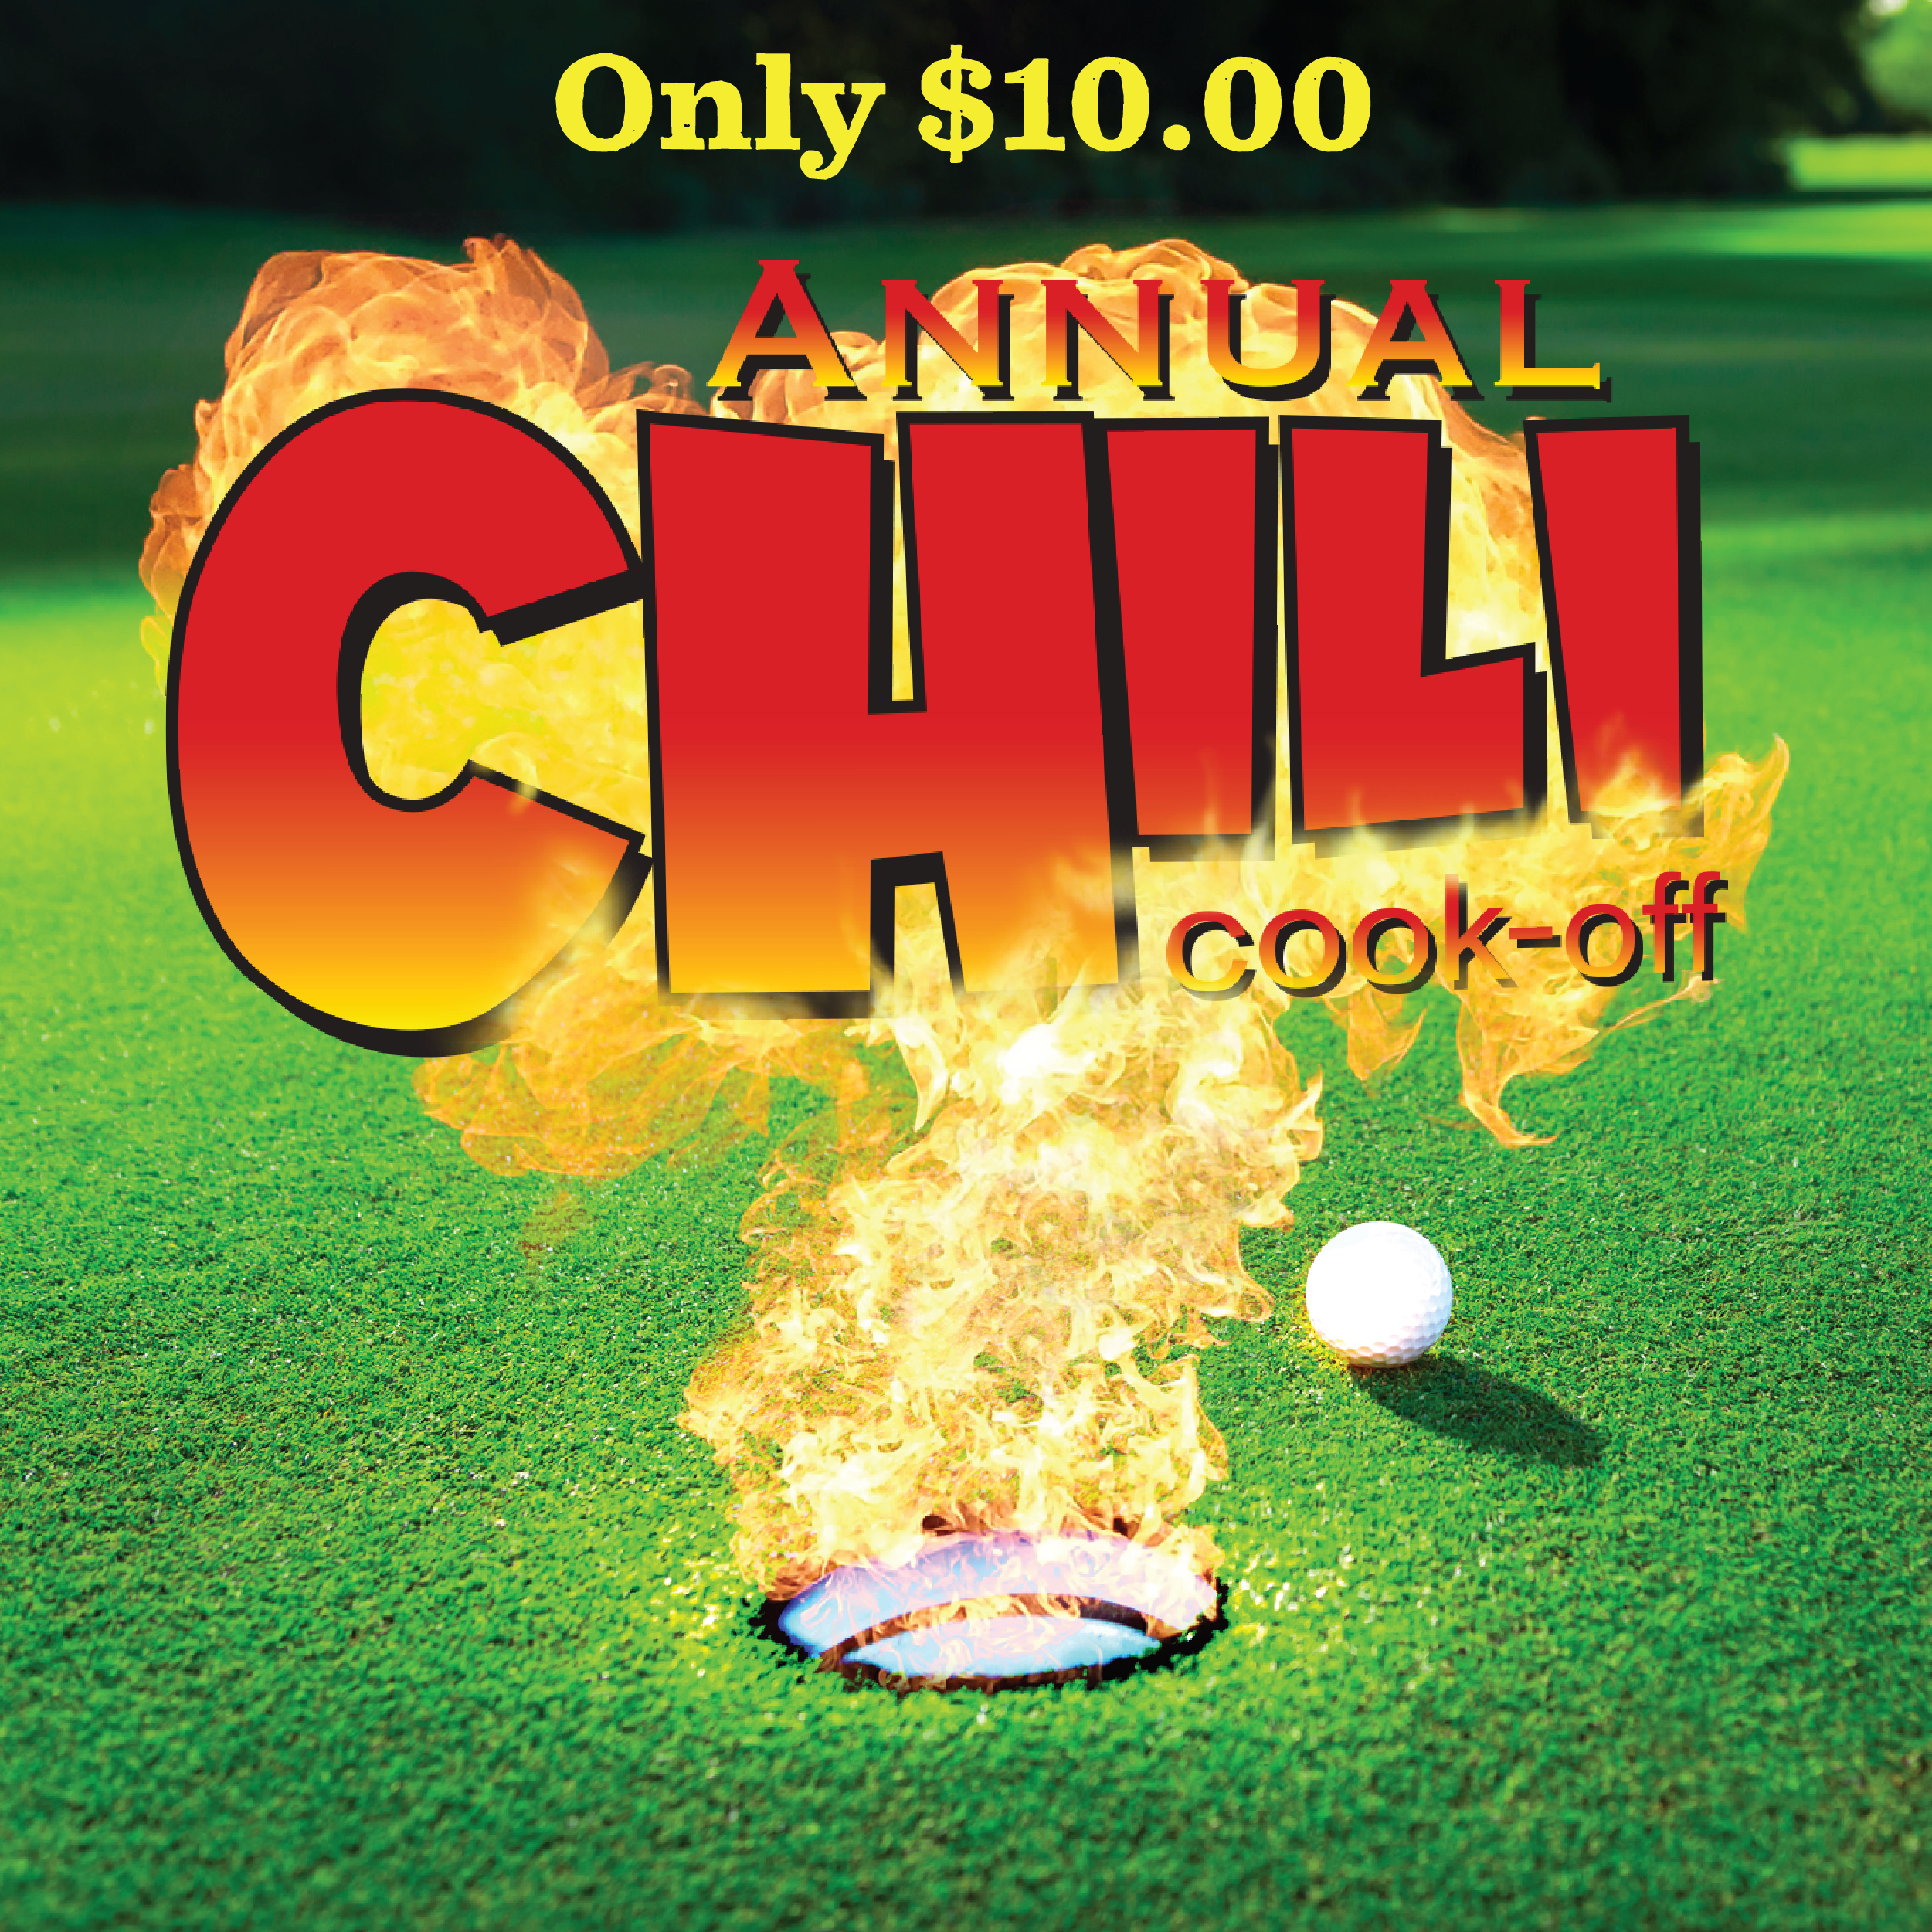 Chili Cook-off 2023 headline on image of flames shooting out of a golf hole